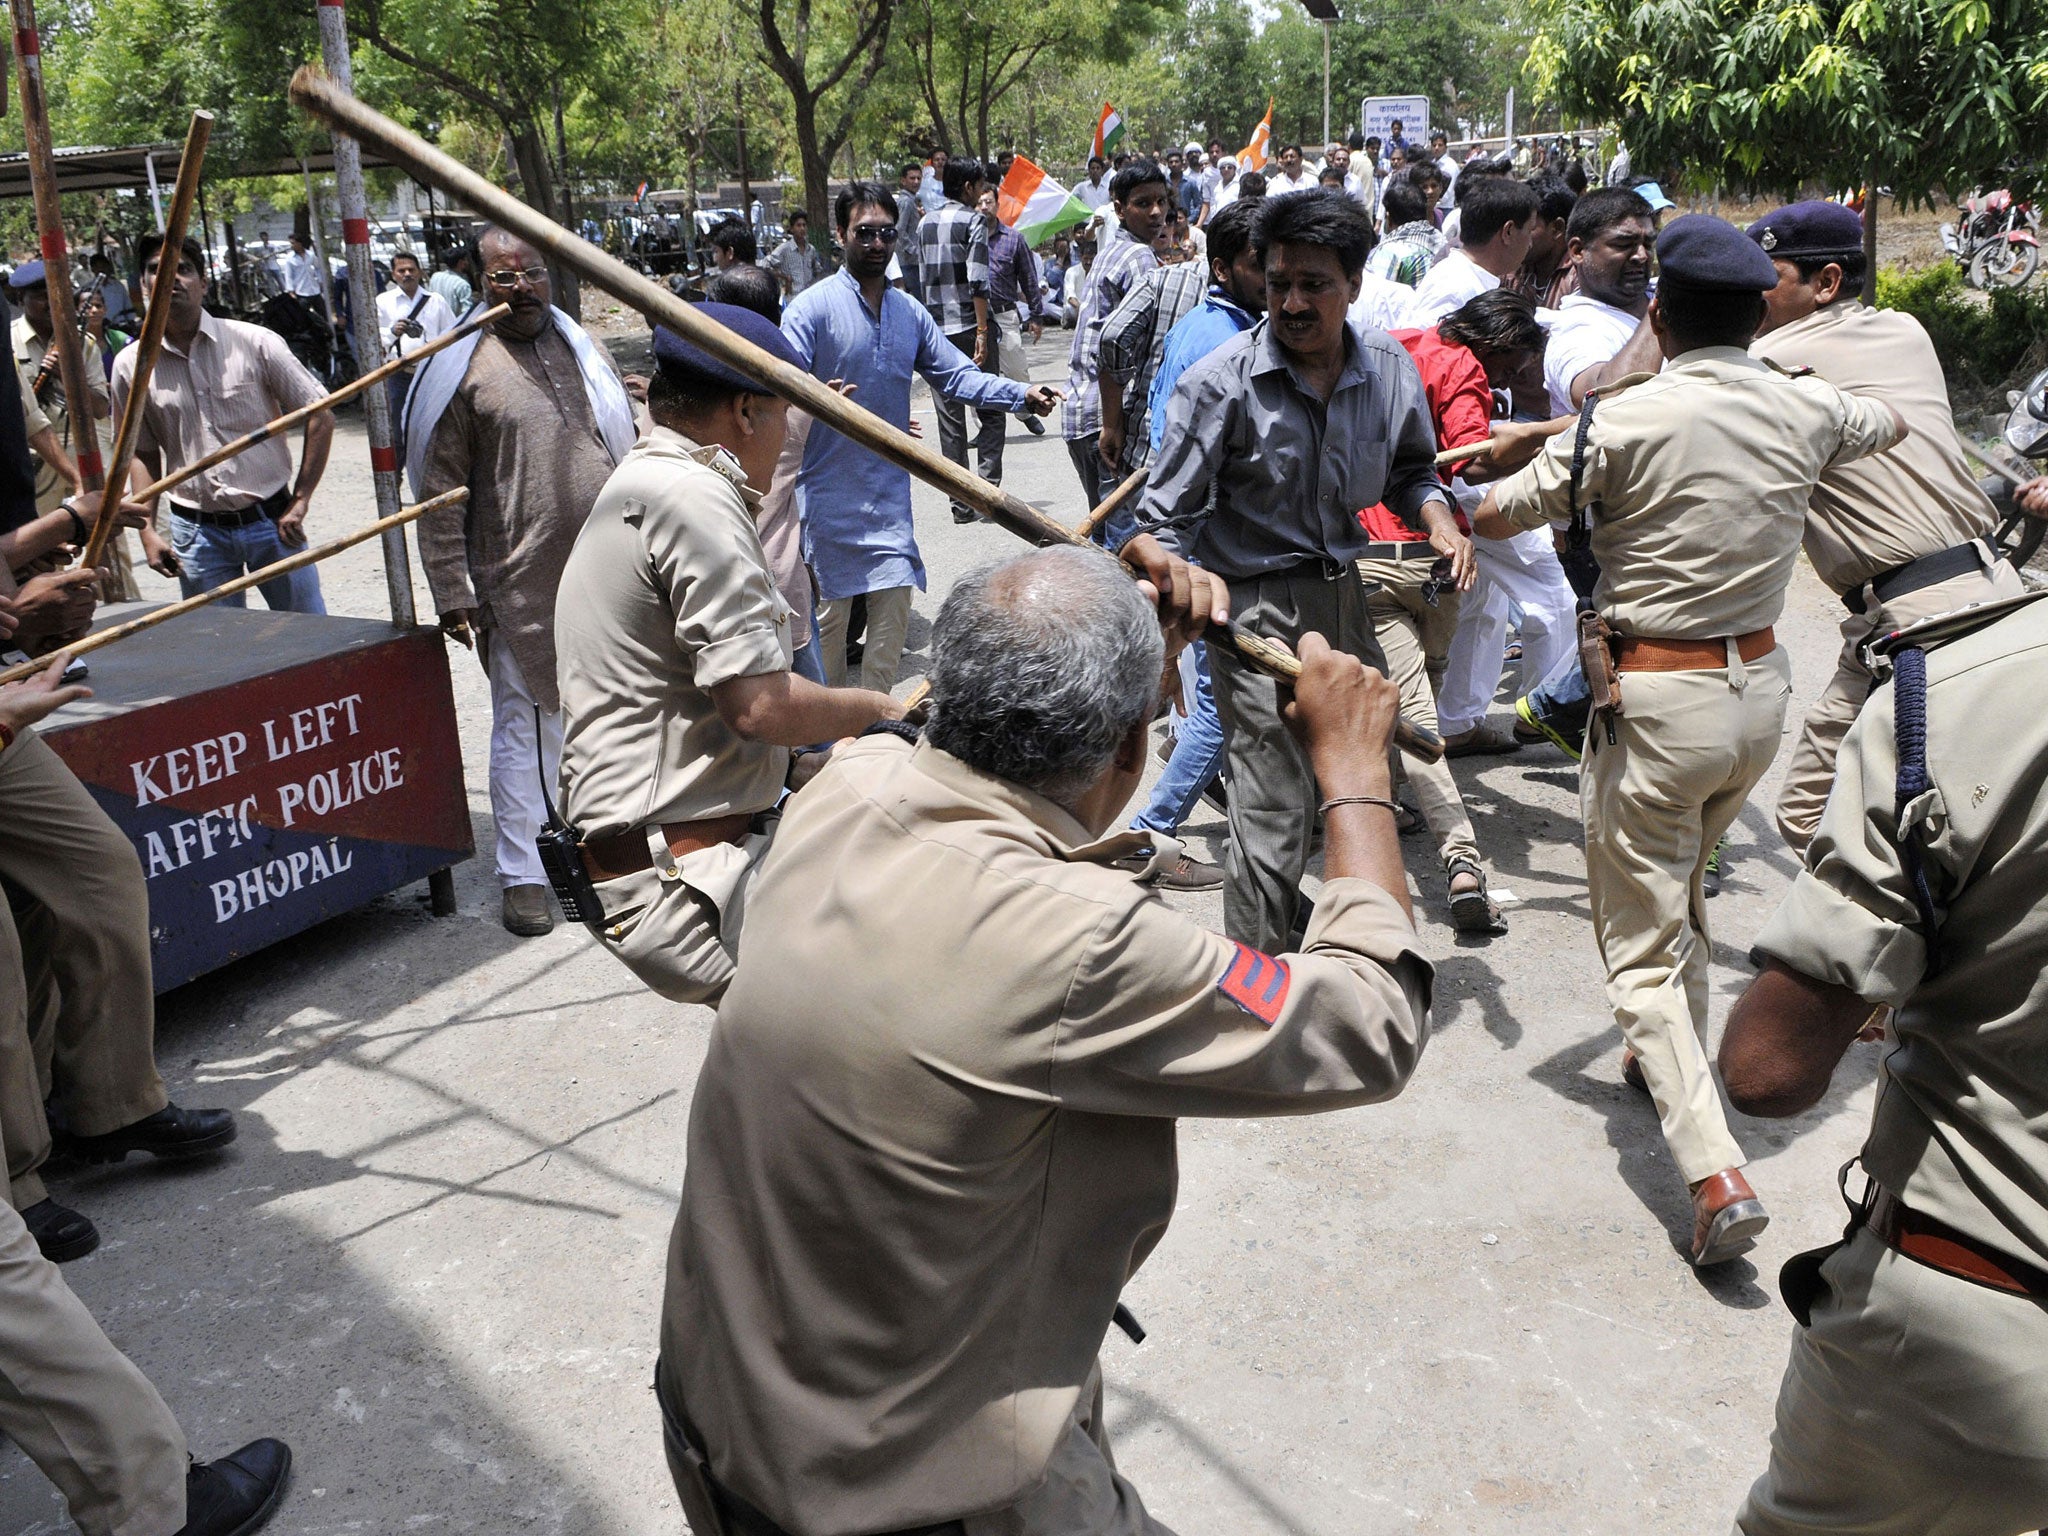 Congress party workers clash with police at a protest after the rebel attack